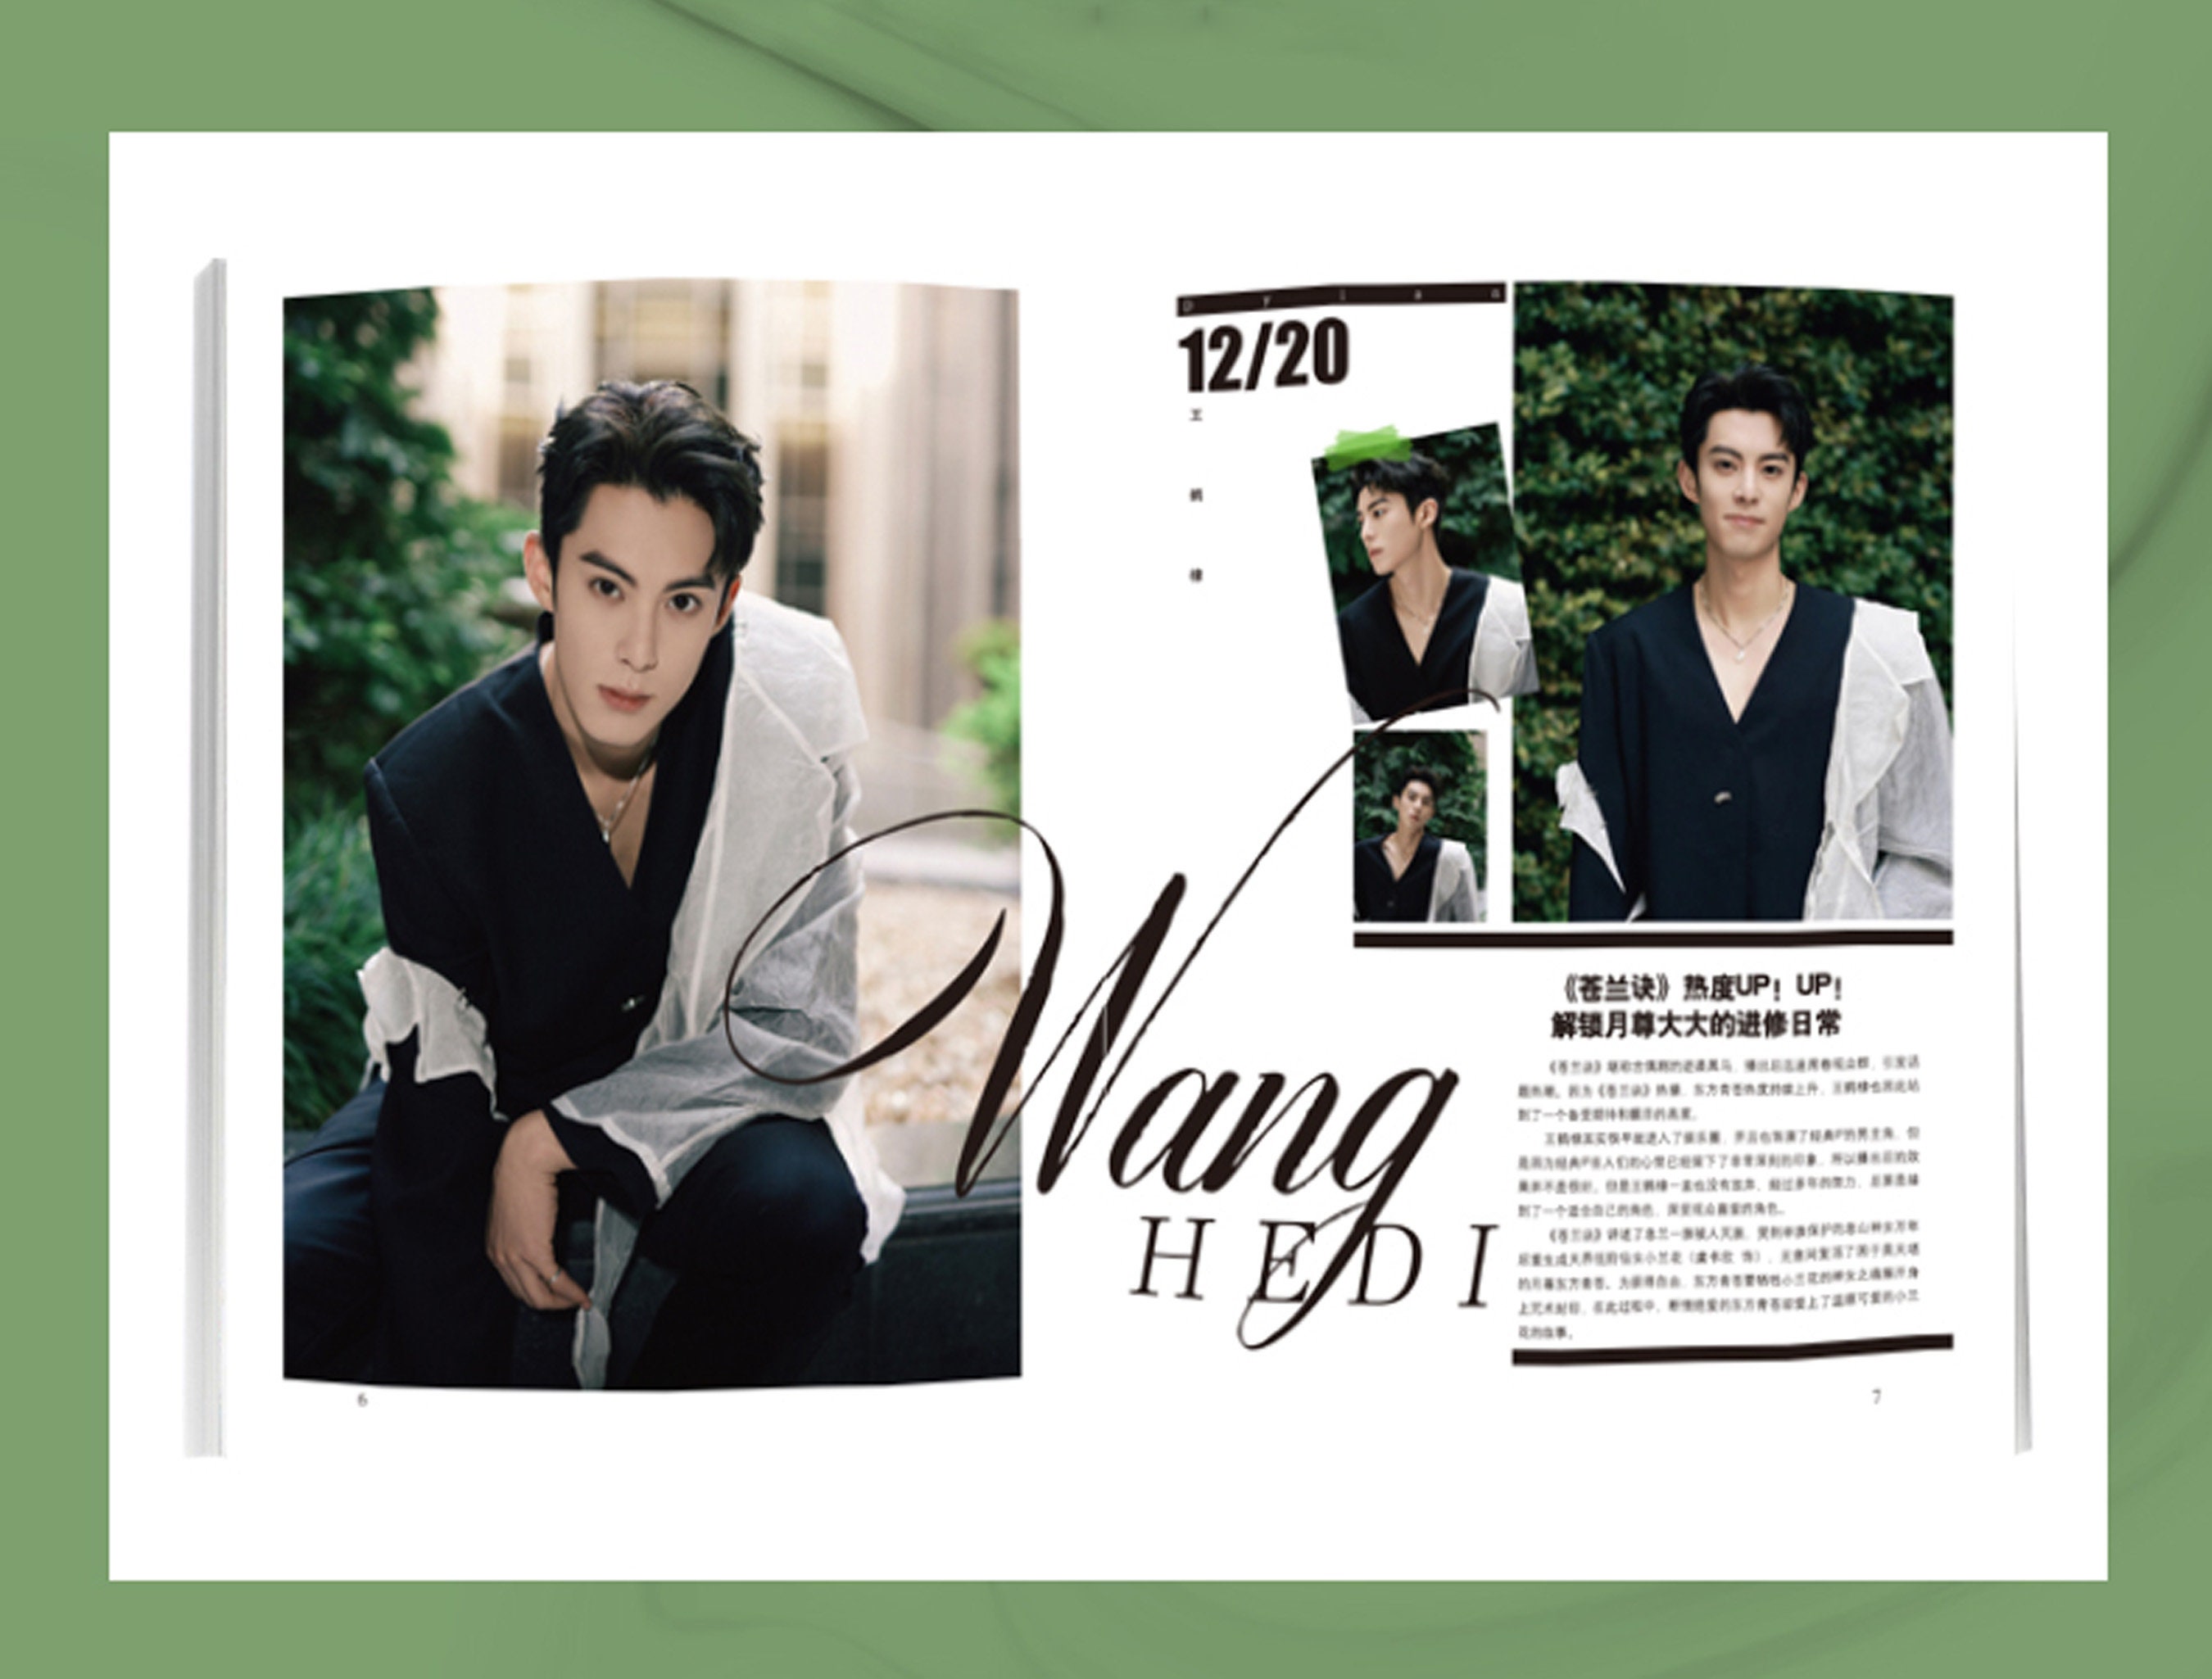 dylan wang Photographic Print for Sale by Divya21